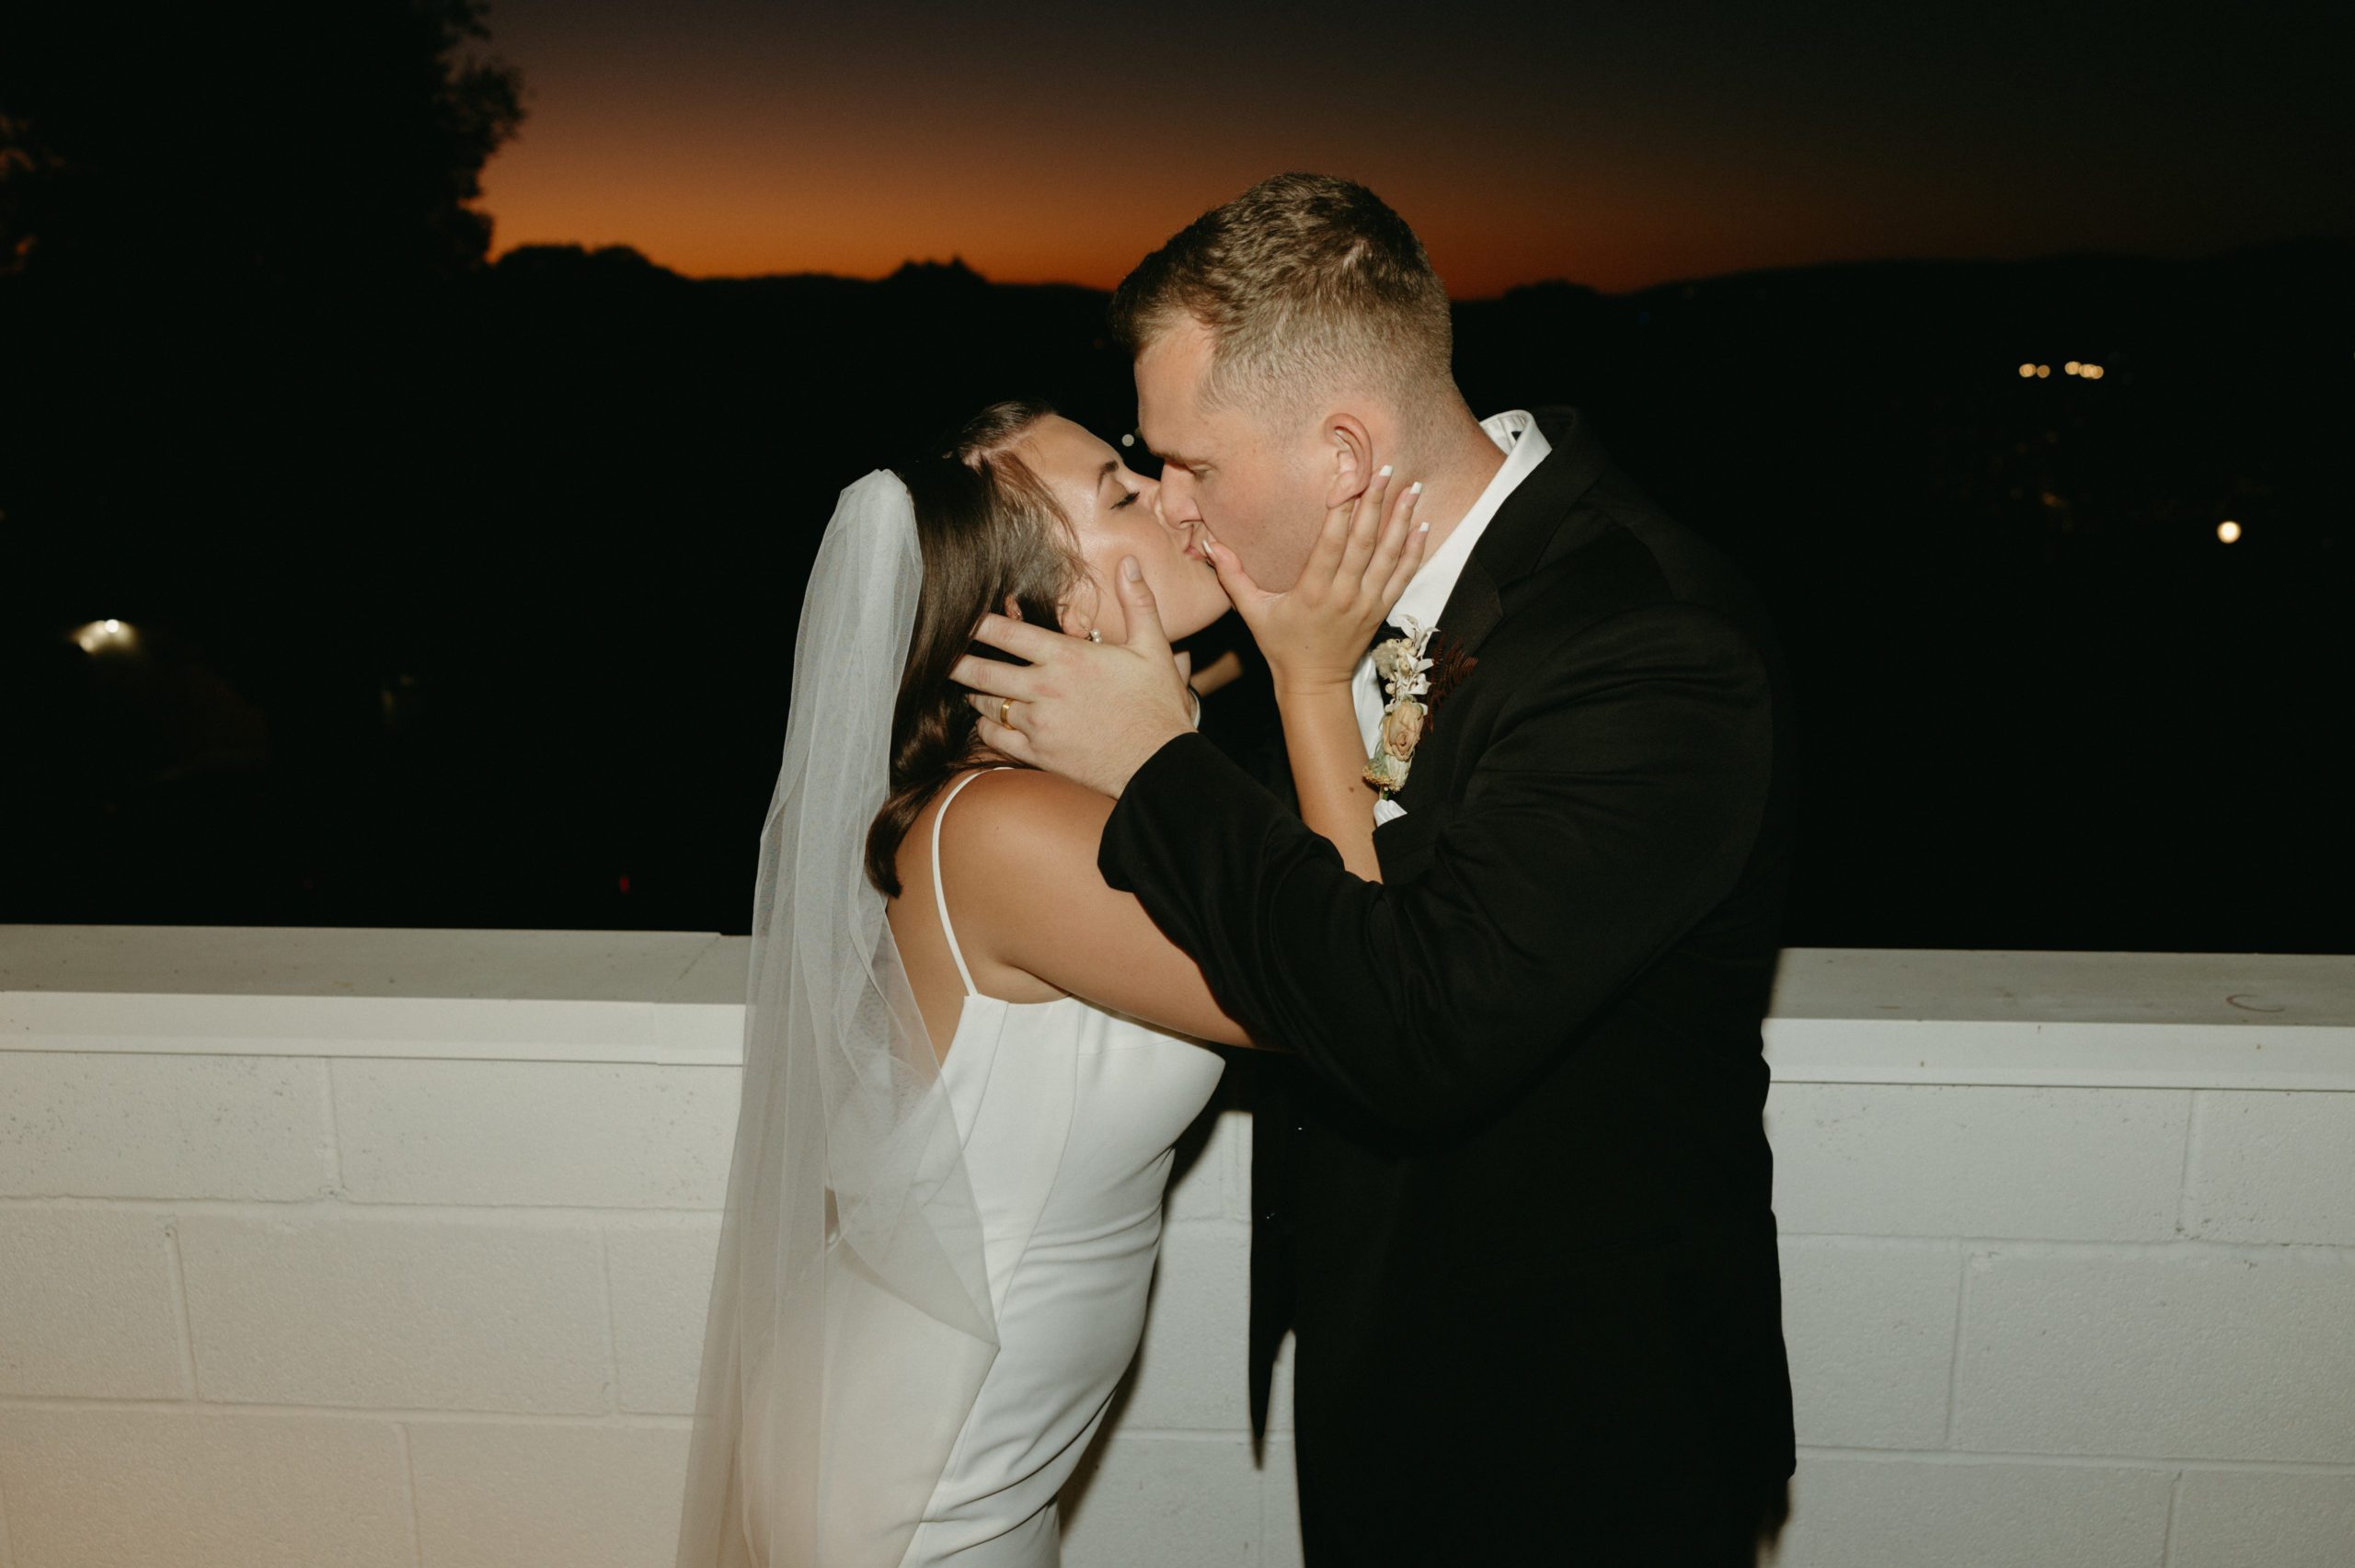 flash photo of bride and groom kissing at wedding